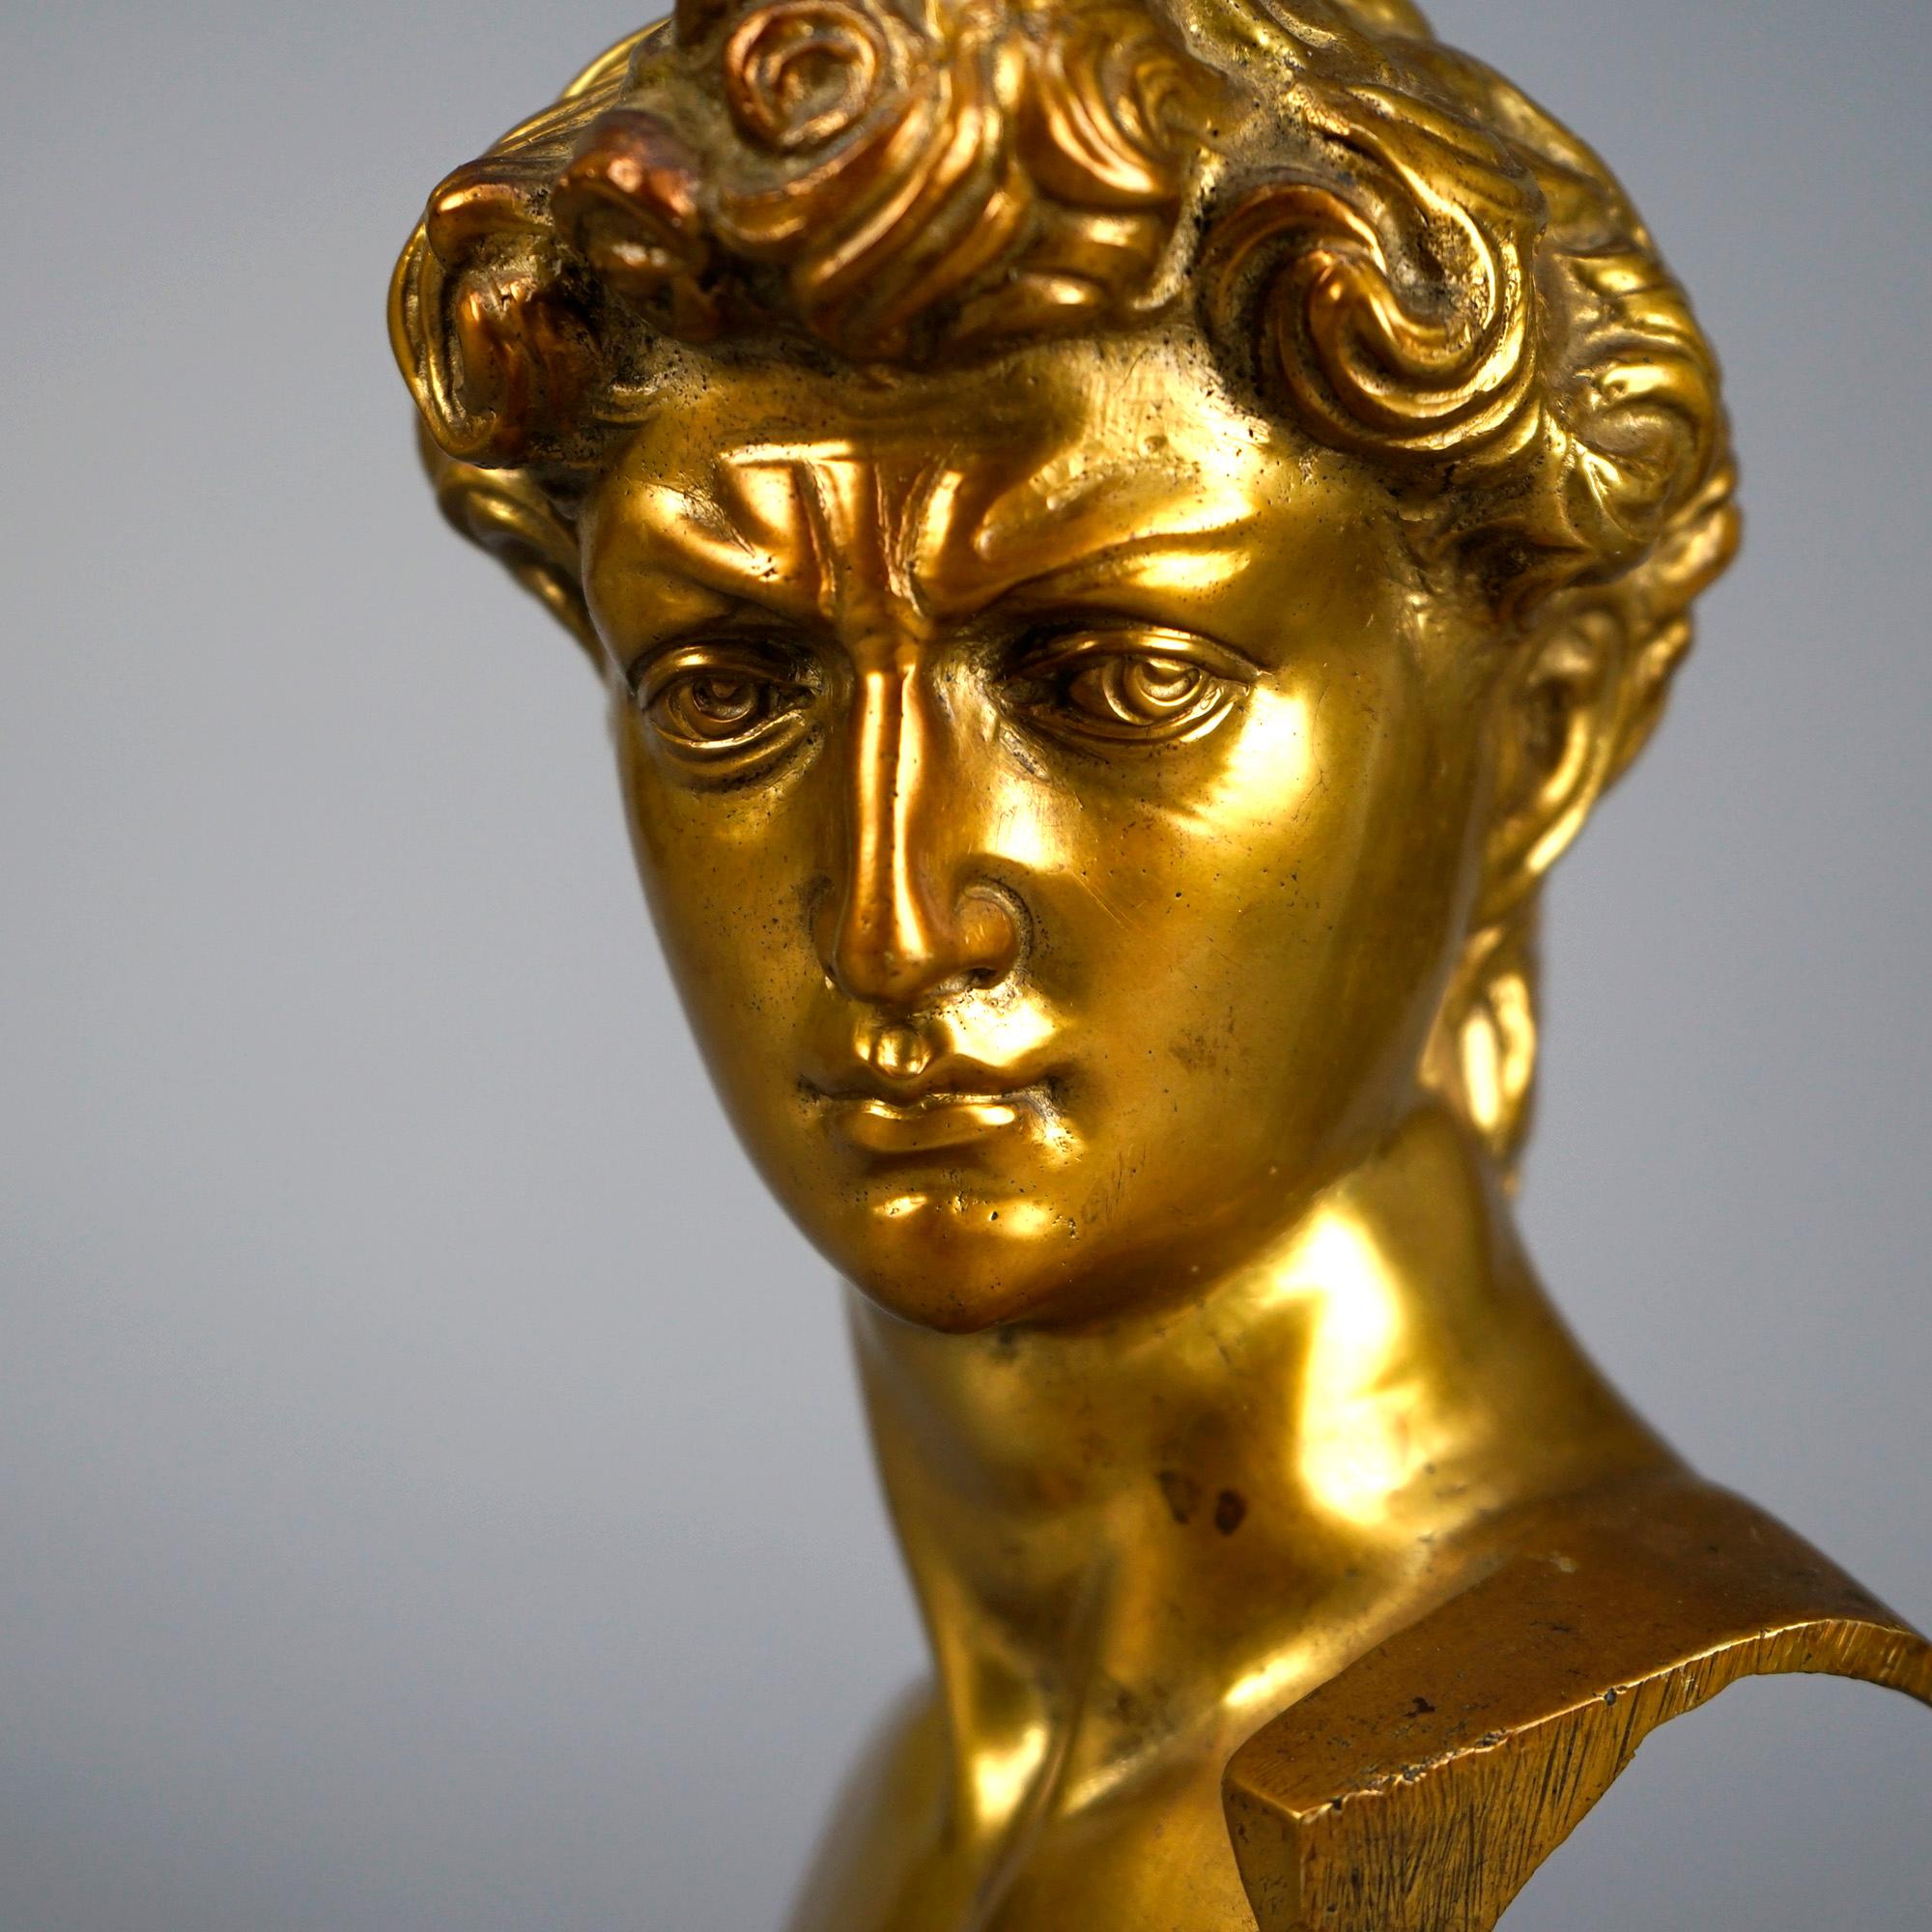 Antique Neoclassical Gilt Bronze Bust Sculpture of a Classical Man, 19th C For Sale 1